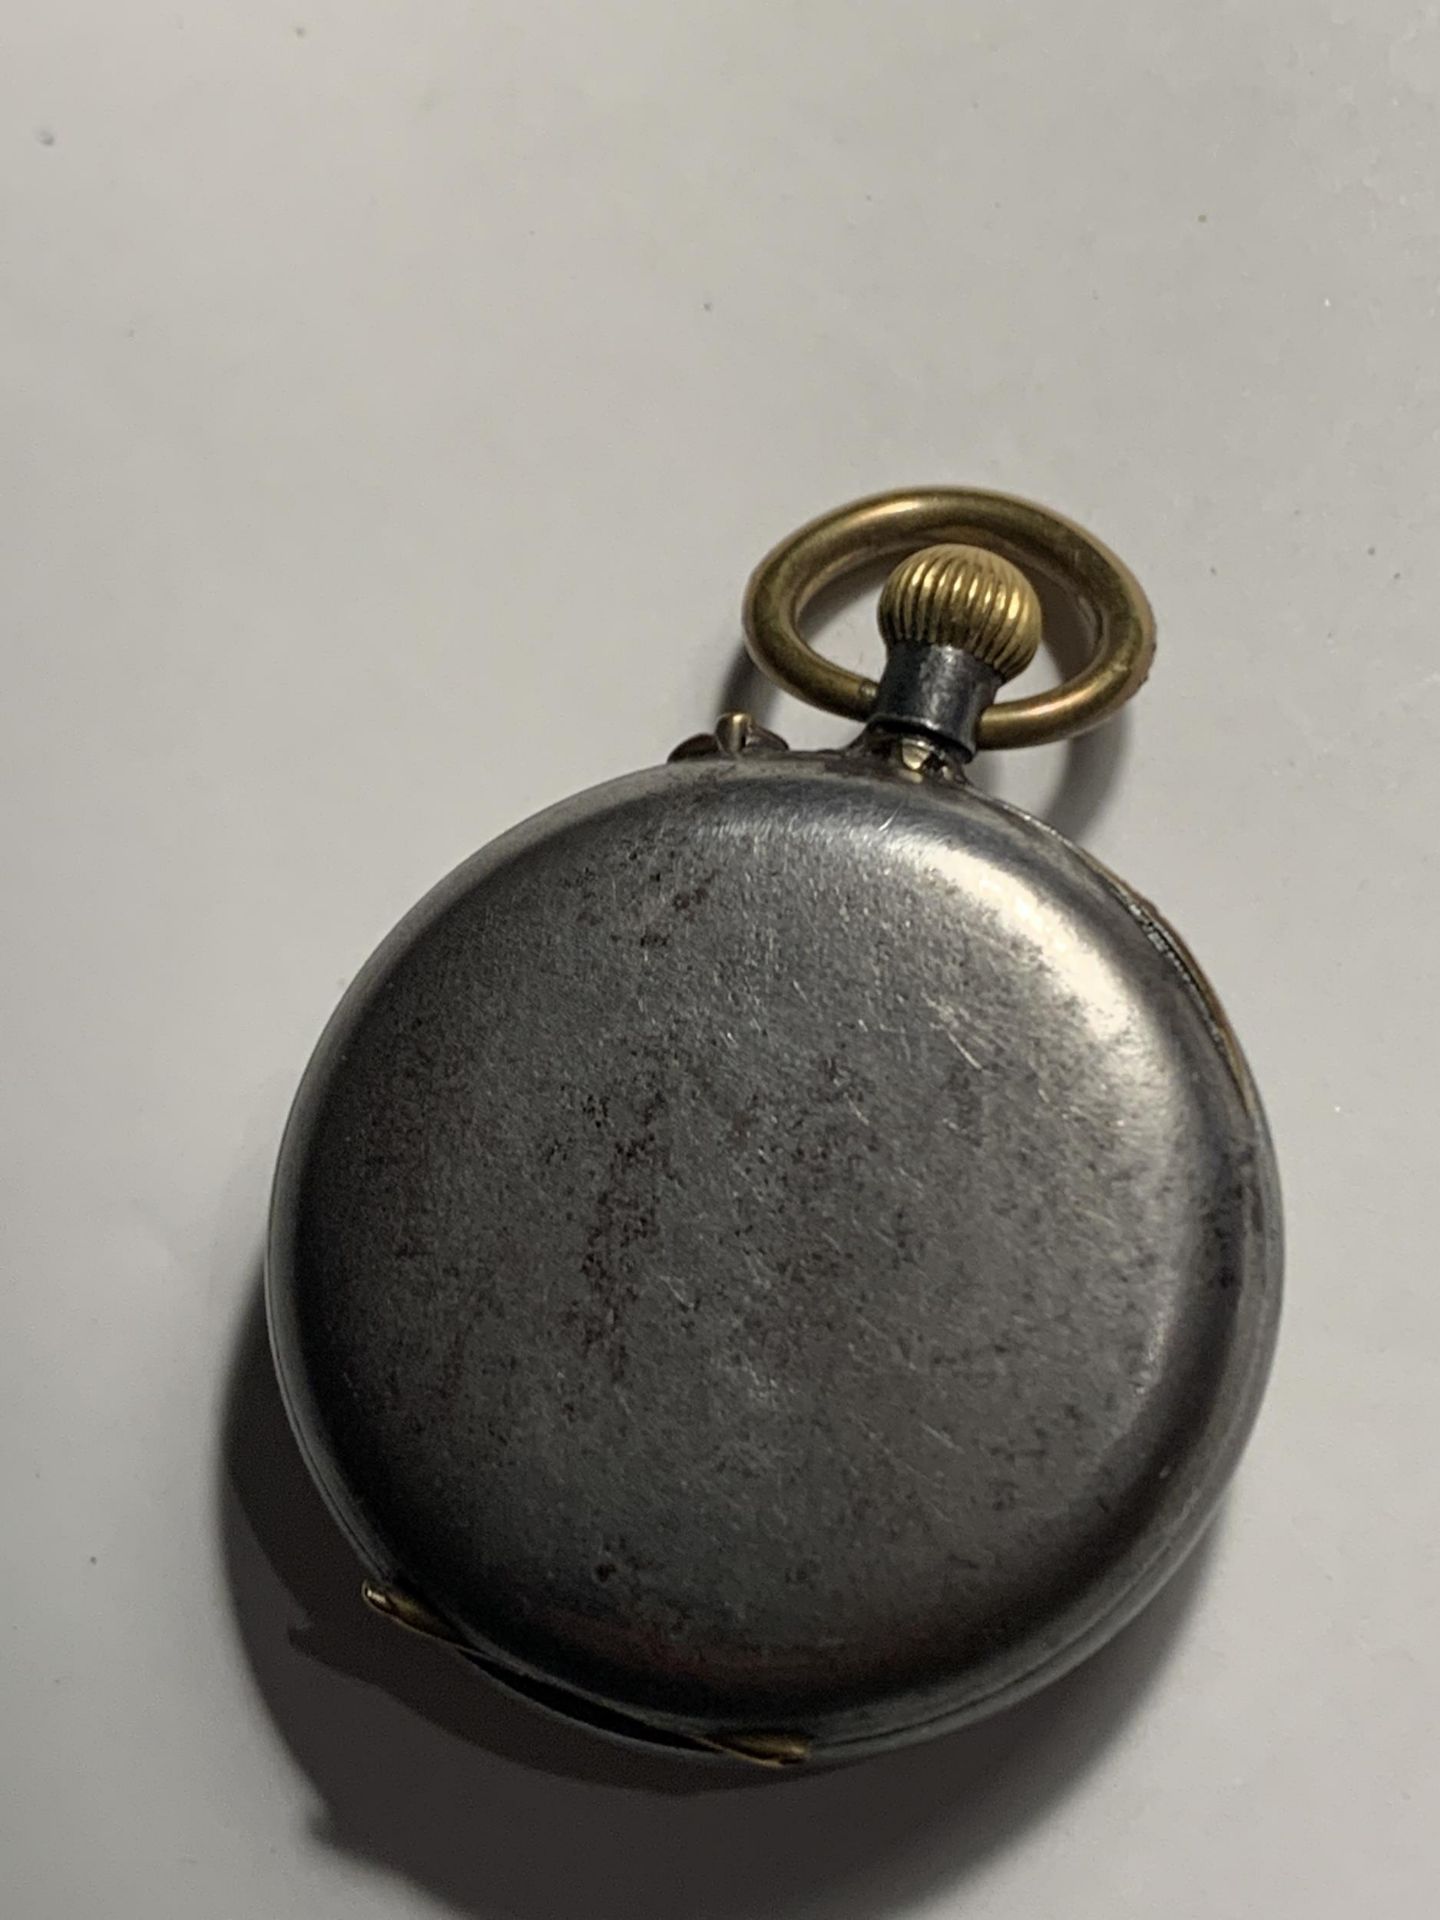 A LADIES RED CROSS POCKET WATCH WITH WHITE ENAMEL FACE AND ROMAN NUMERALS SEEN WORKING BUT NO - Image 2 of 2